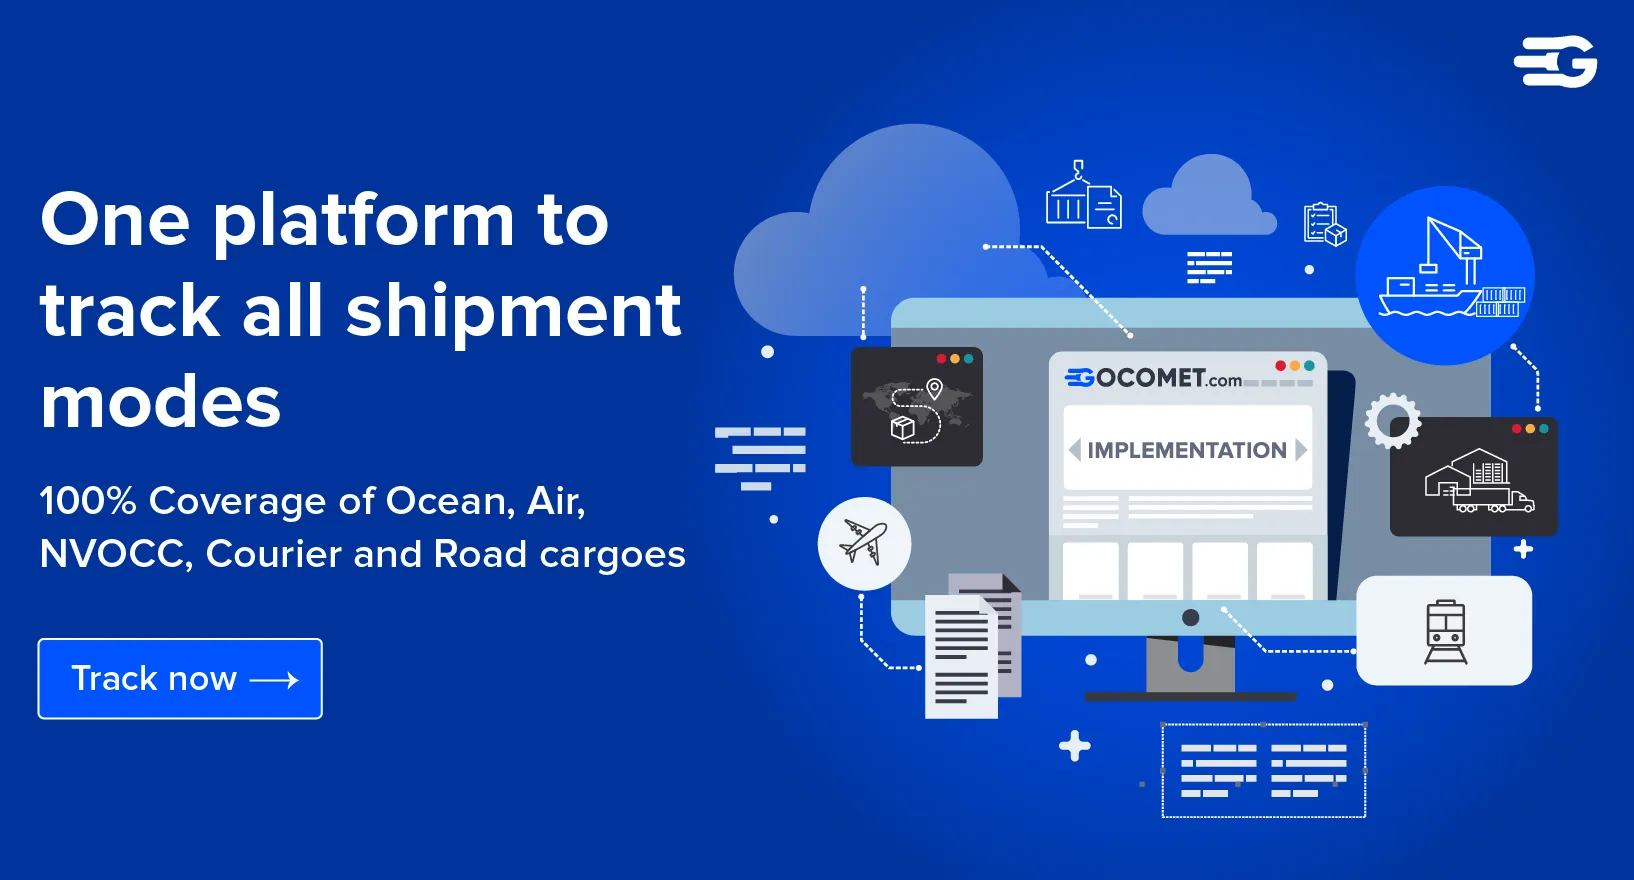 One Platform to track all shipment modes